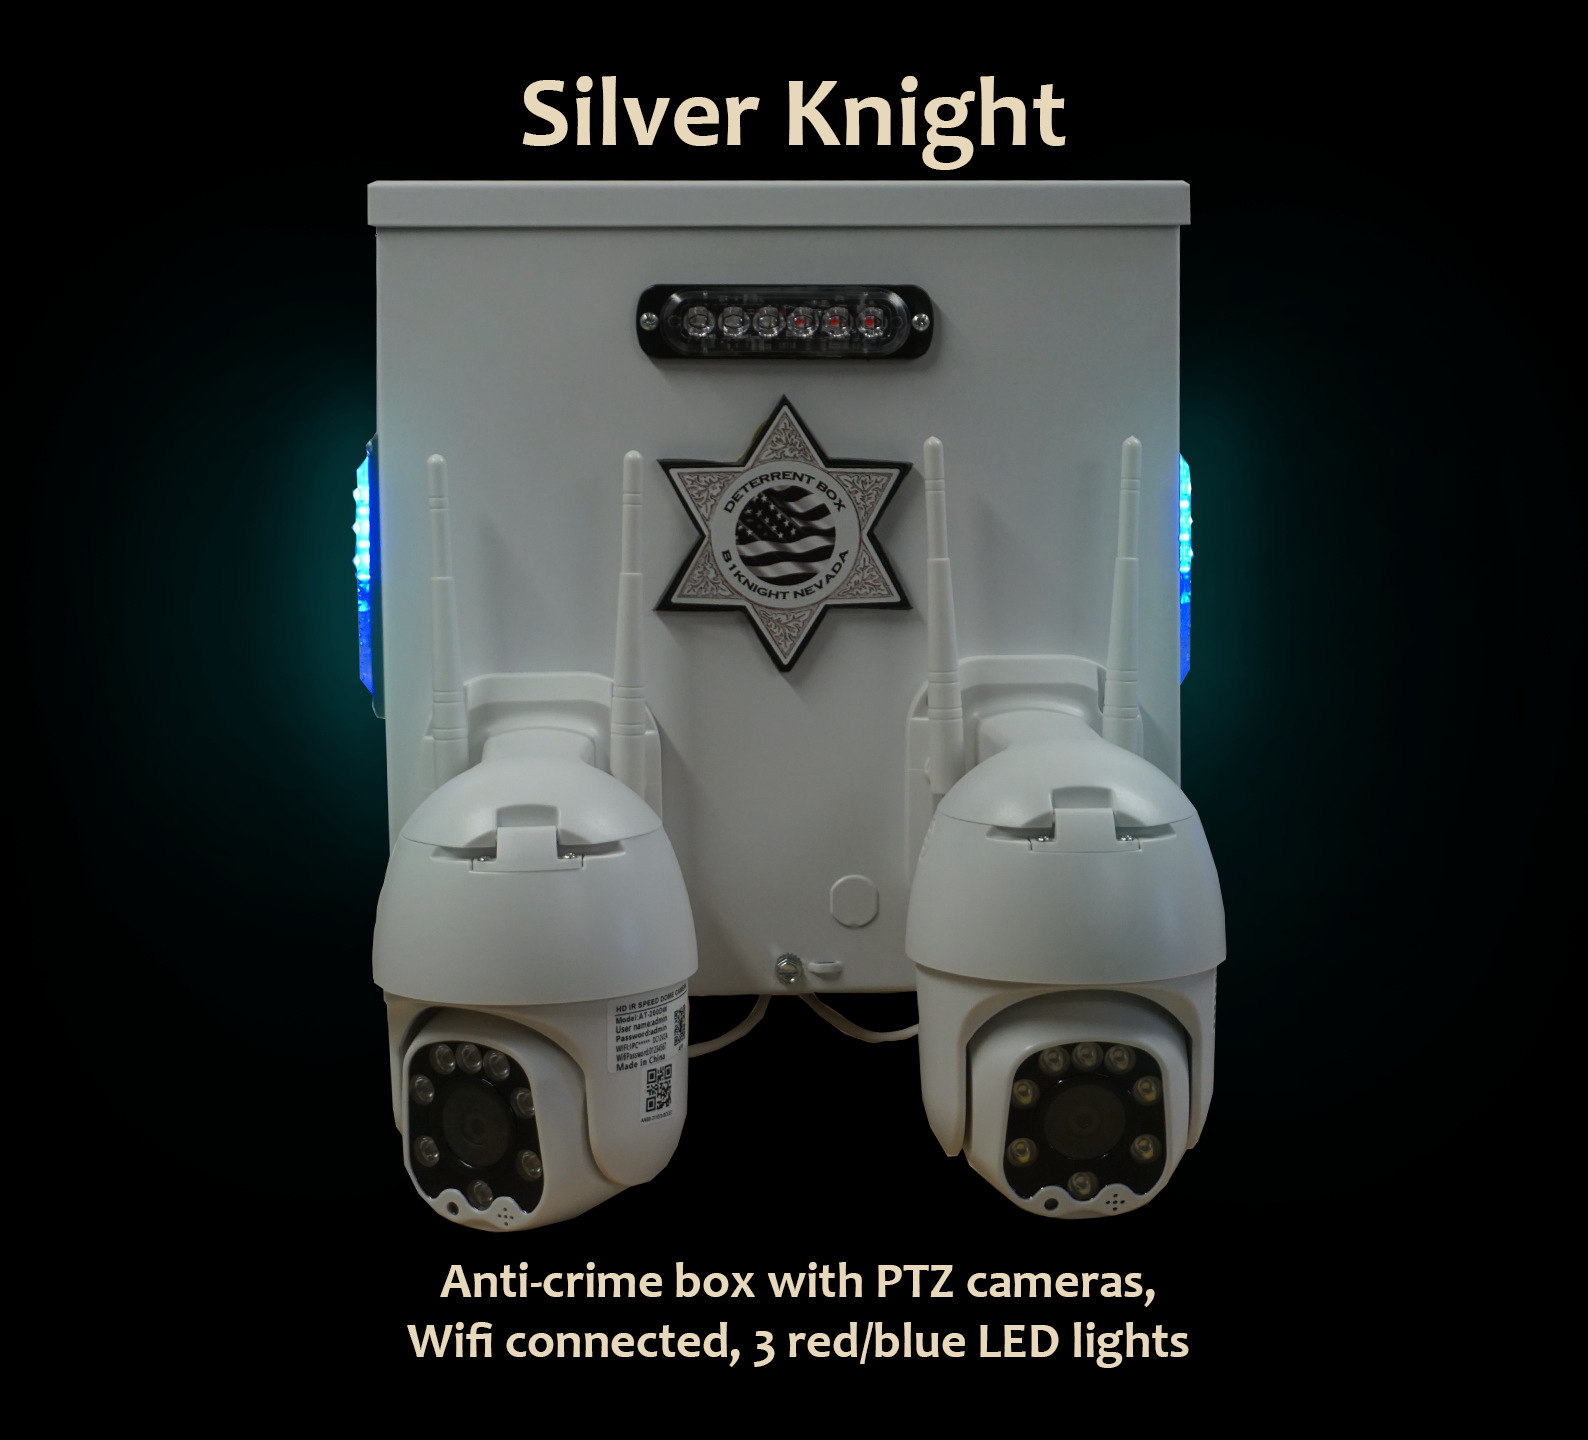 B1KNIGHTSURVEILLANCE | Why are overt crime deterrent boxes better than traditional camera systems? Cover Image